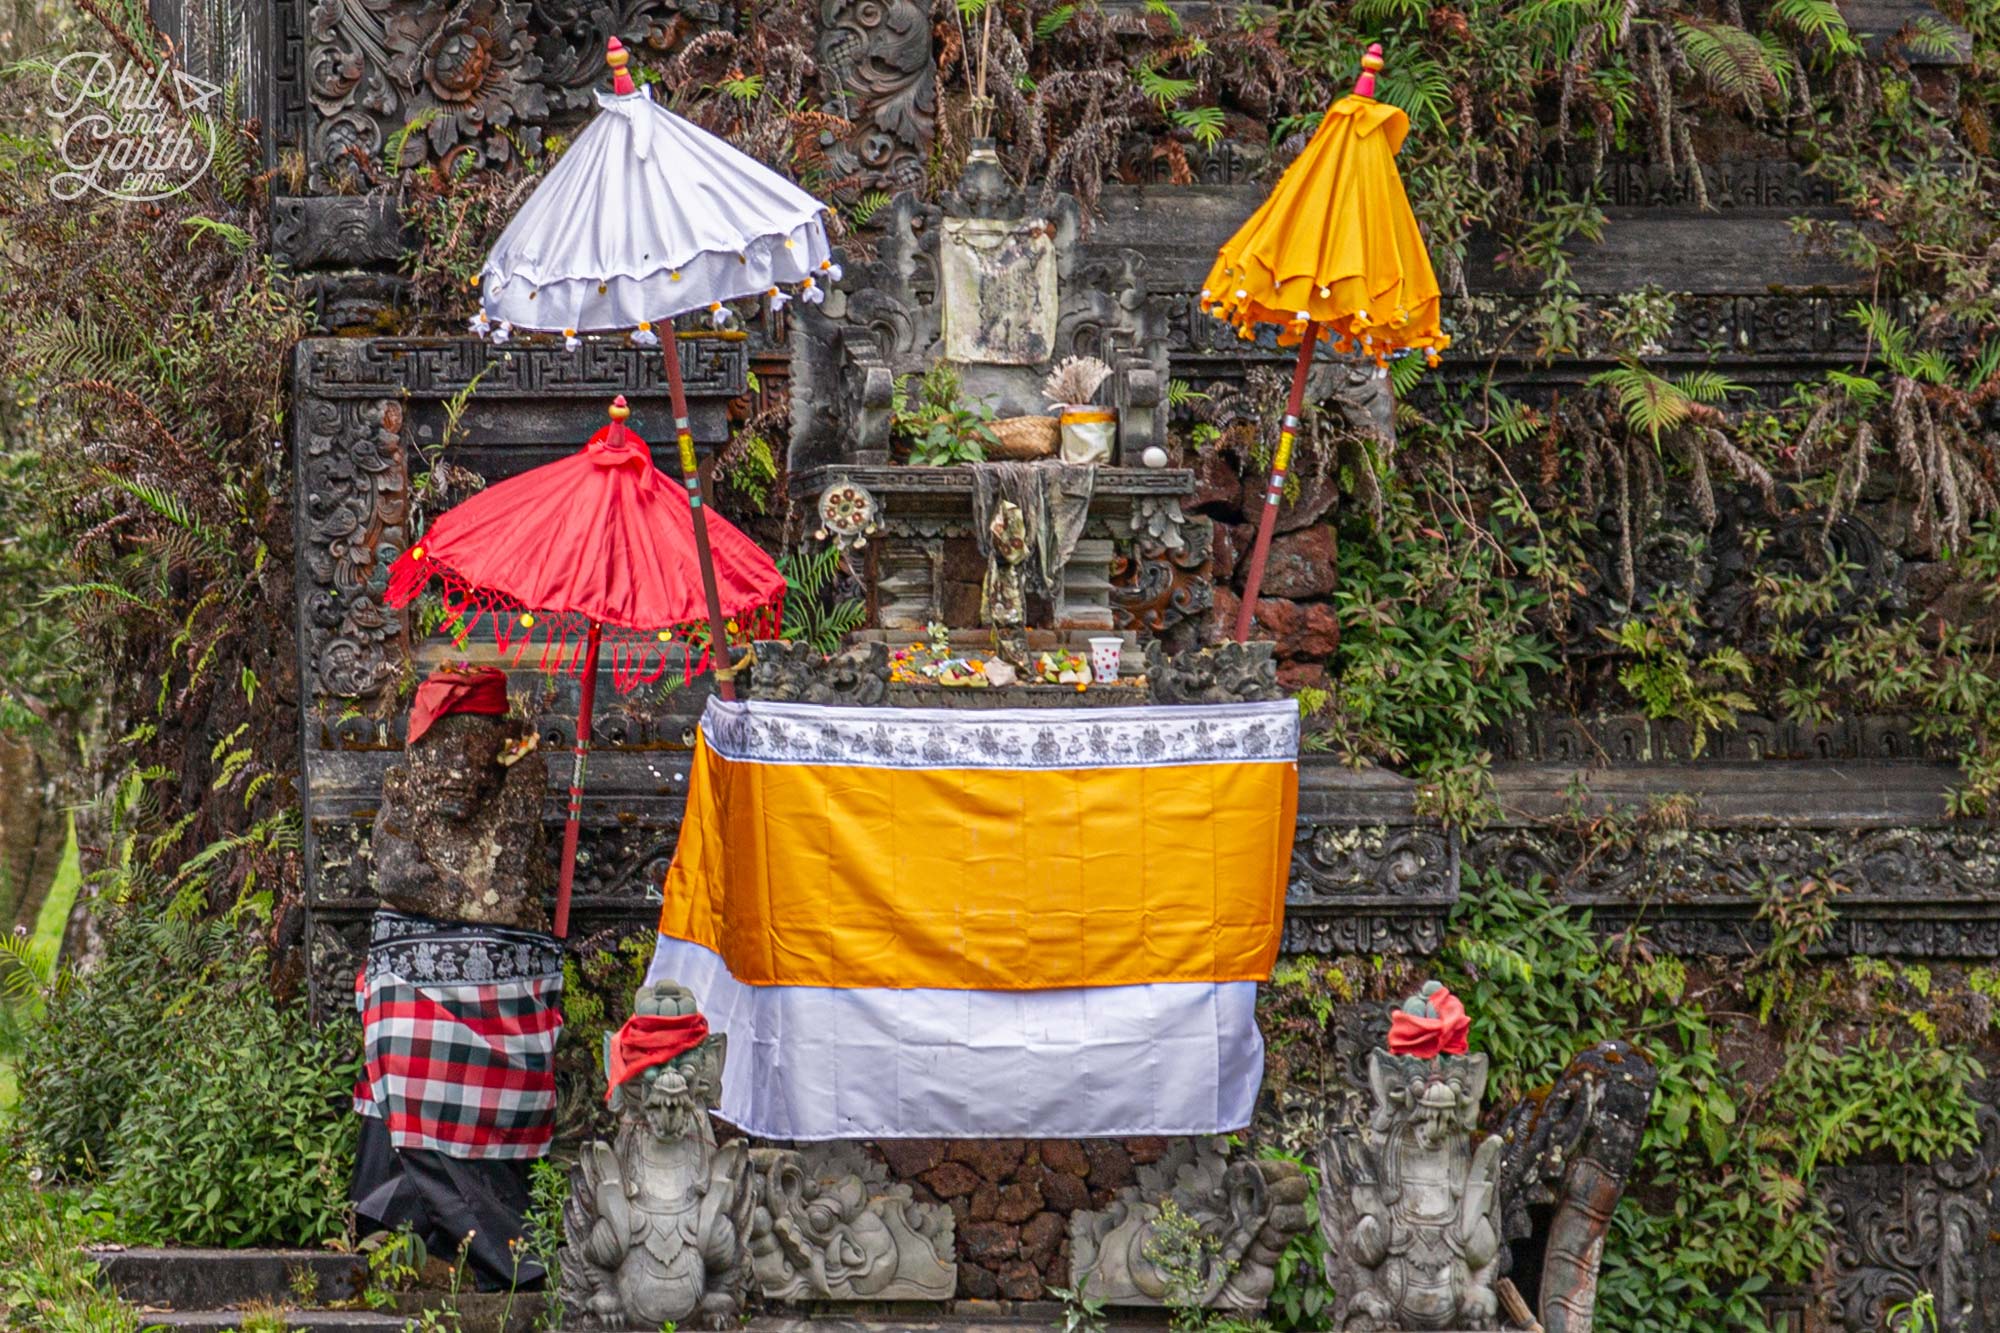 You'll see these umbrellas all over Bali - they symbolise protection and often seen at entrance ways